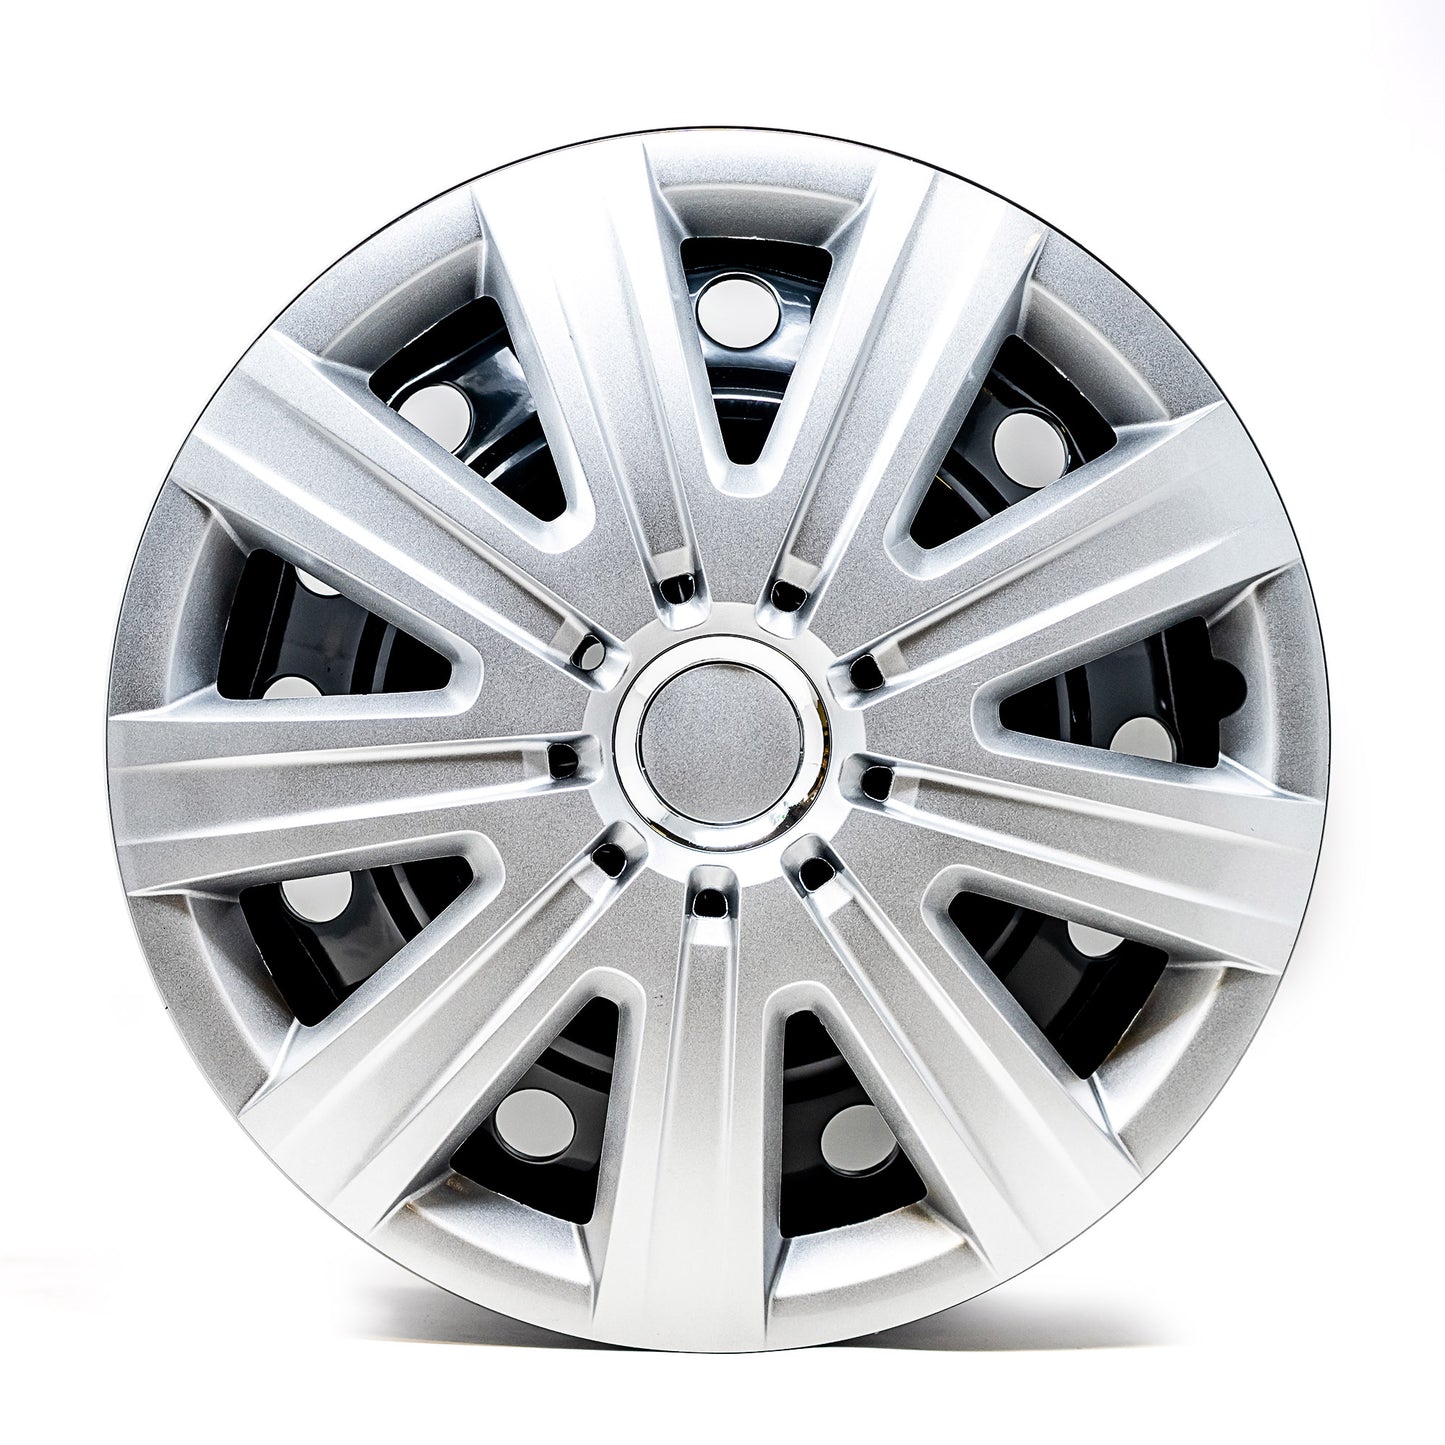 Nero Wheel Cover Kit - Silver (4 Pack)